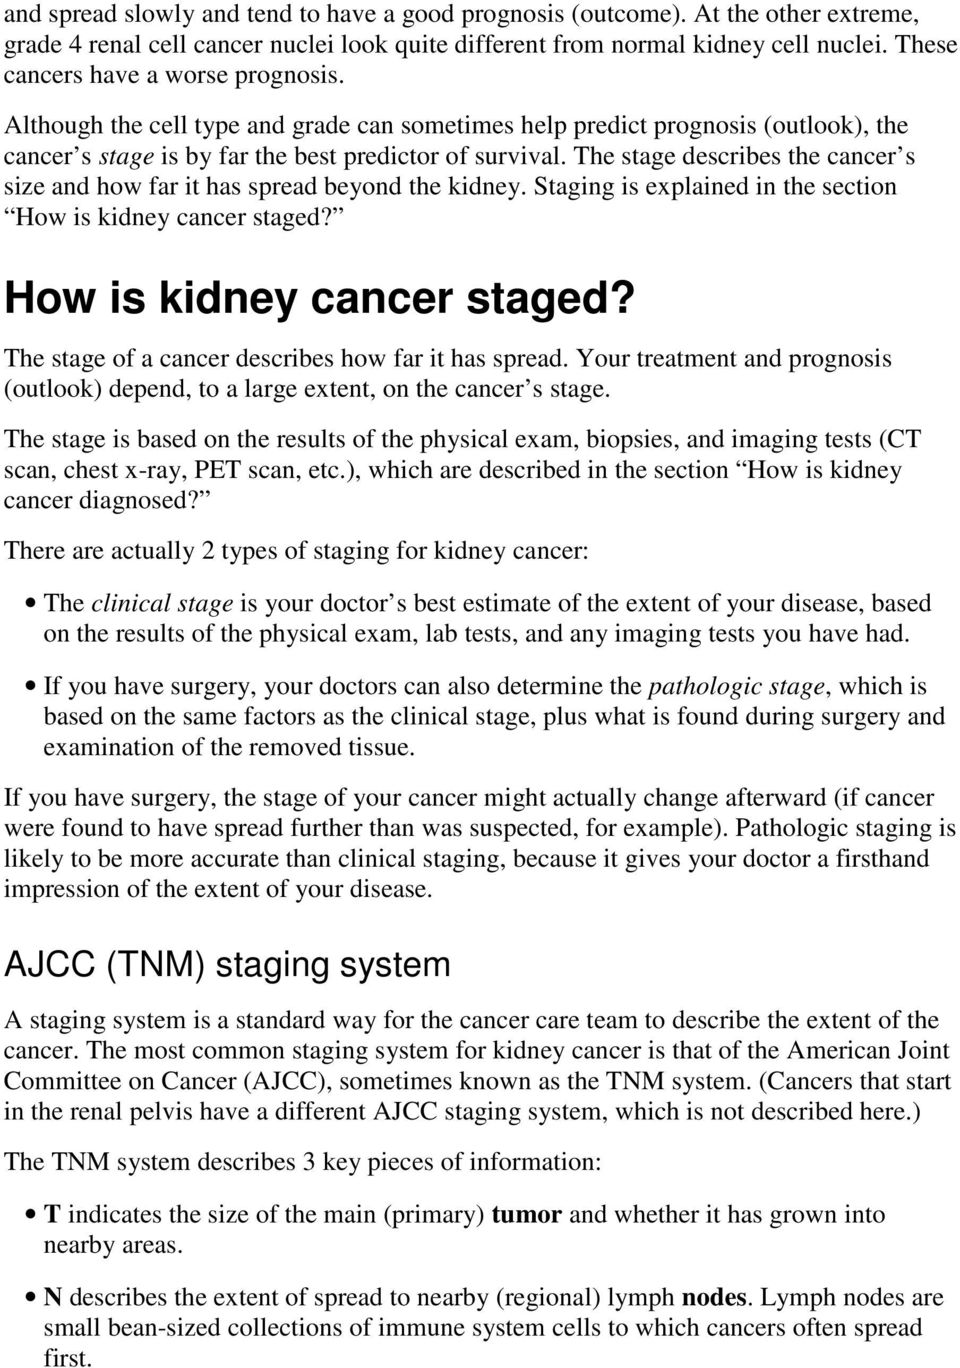 The stage describes the cancer s size and how far it has spread beyond the kidney. Staging is explained in the section How is kidney cancer staged?